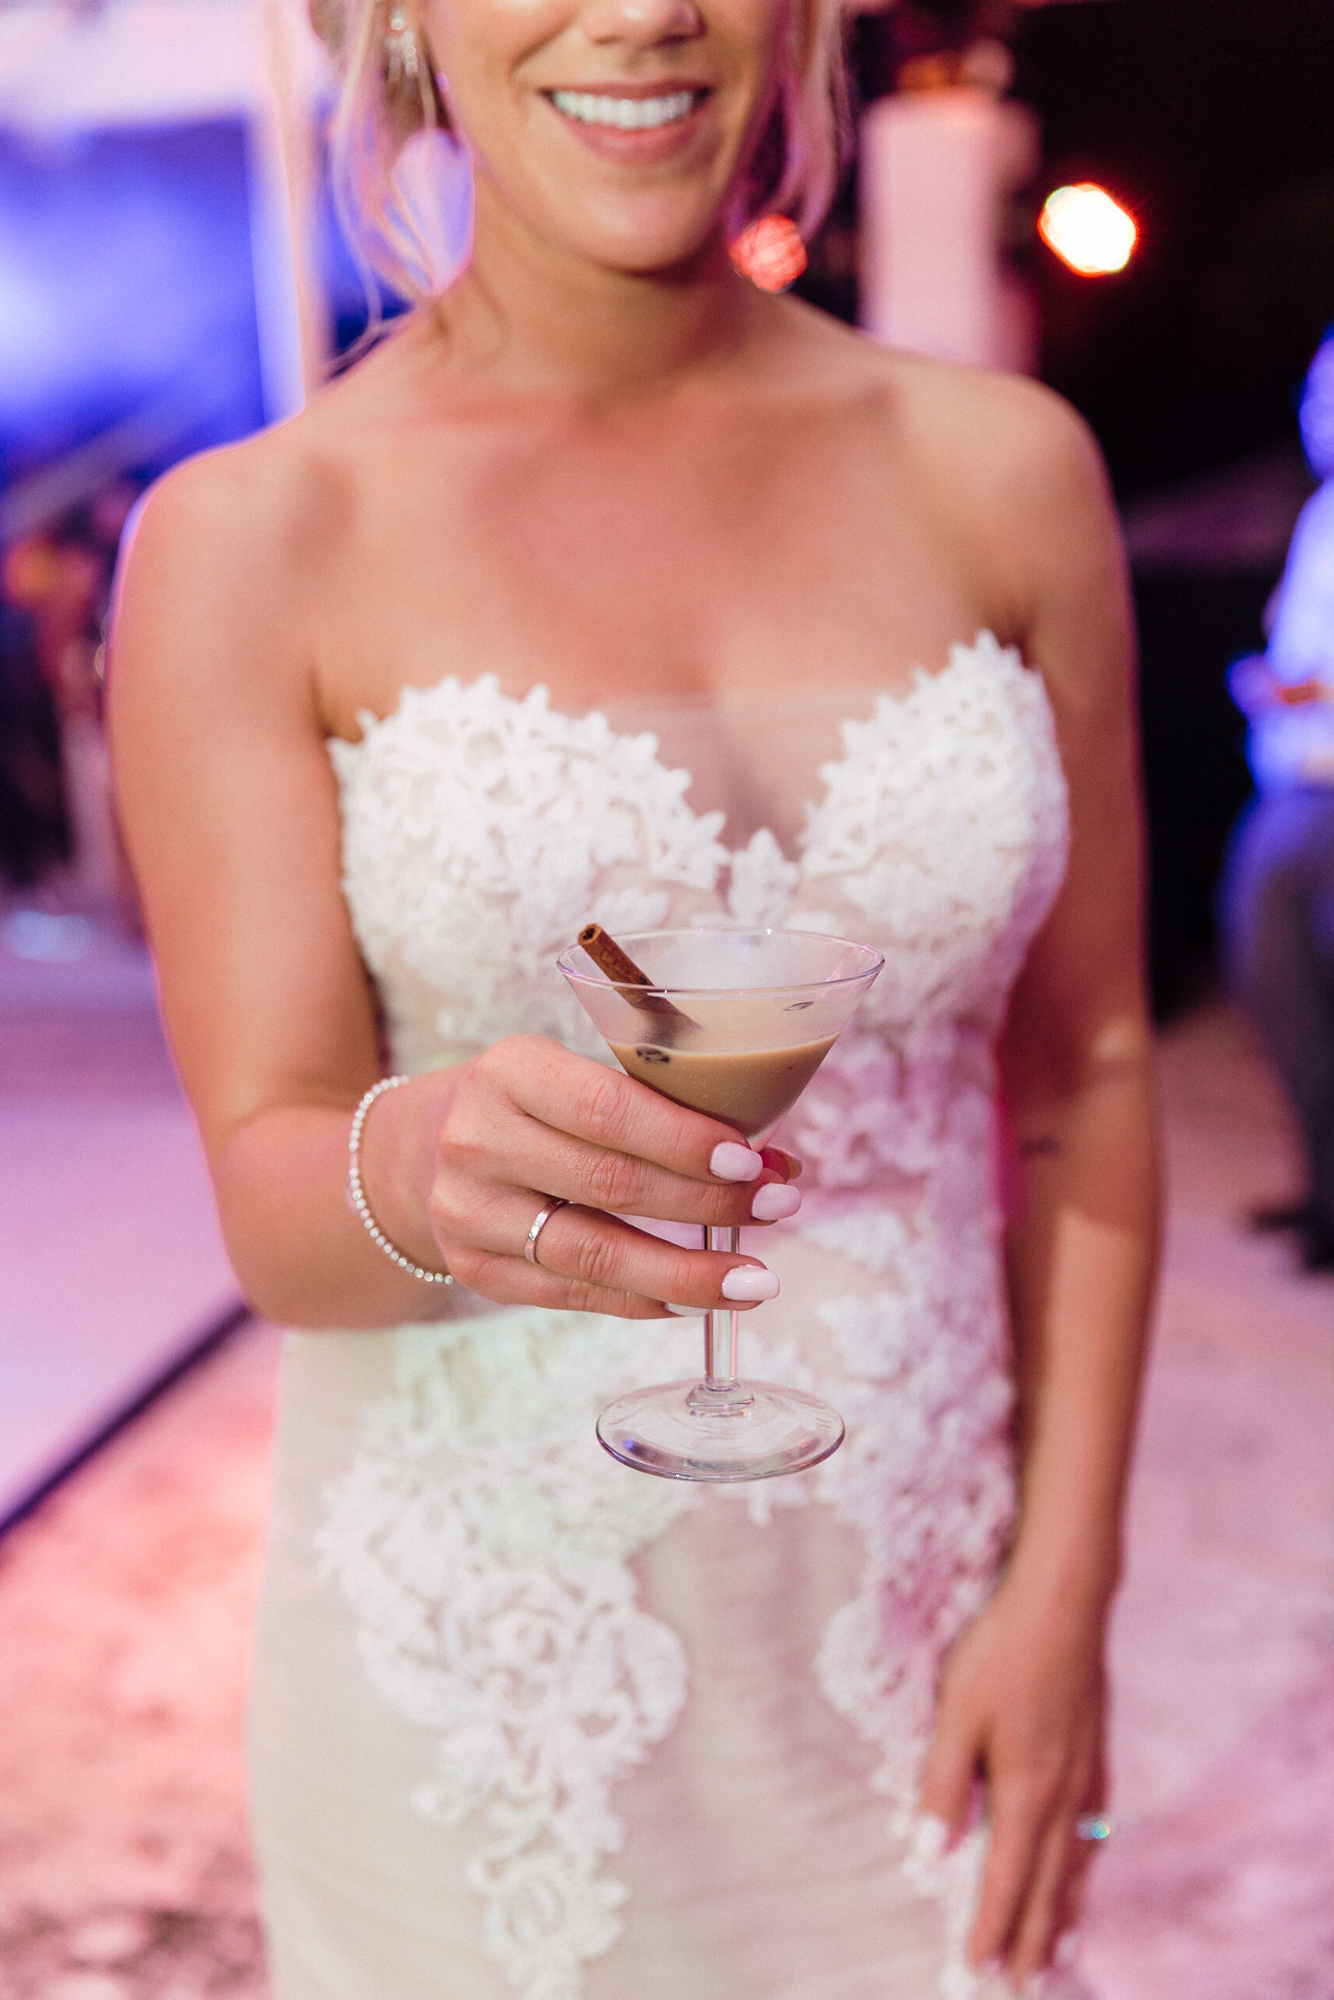 The martini bar opened up for guests on Fisher Island at this Florida wedding. Here's the bride holding the super yummy espresso martini!